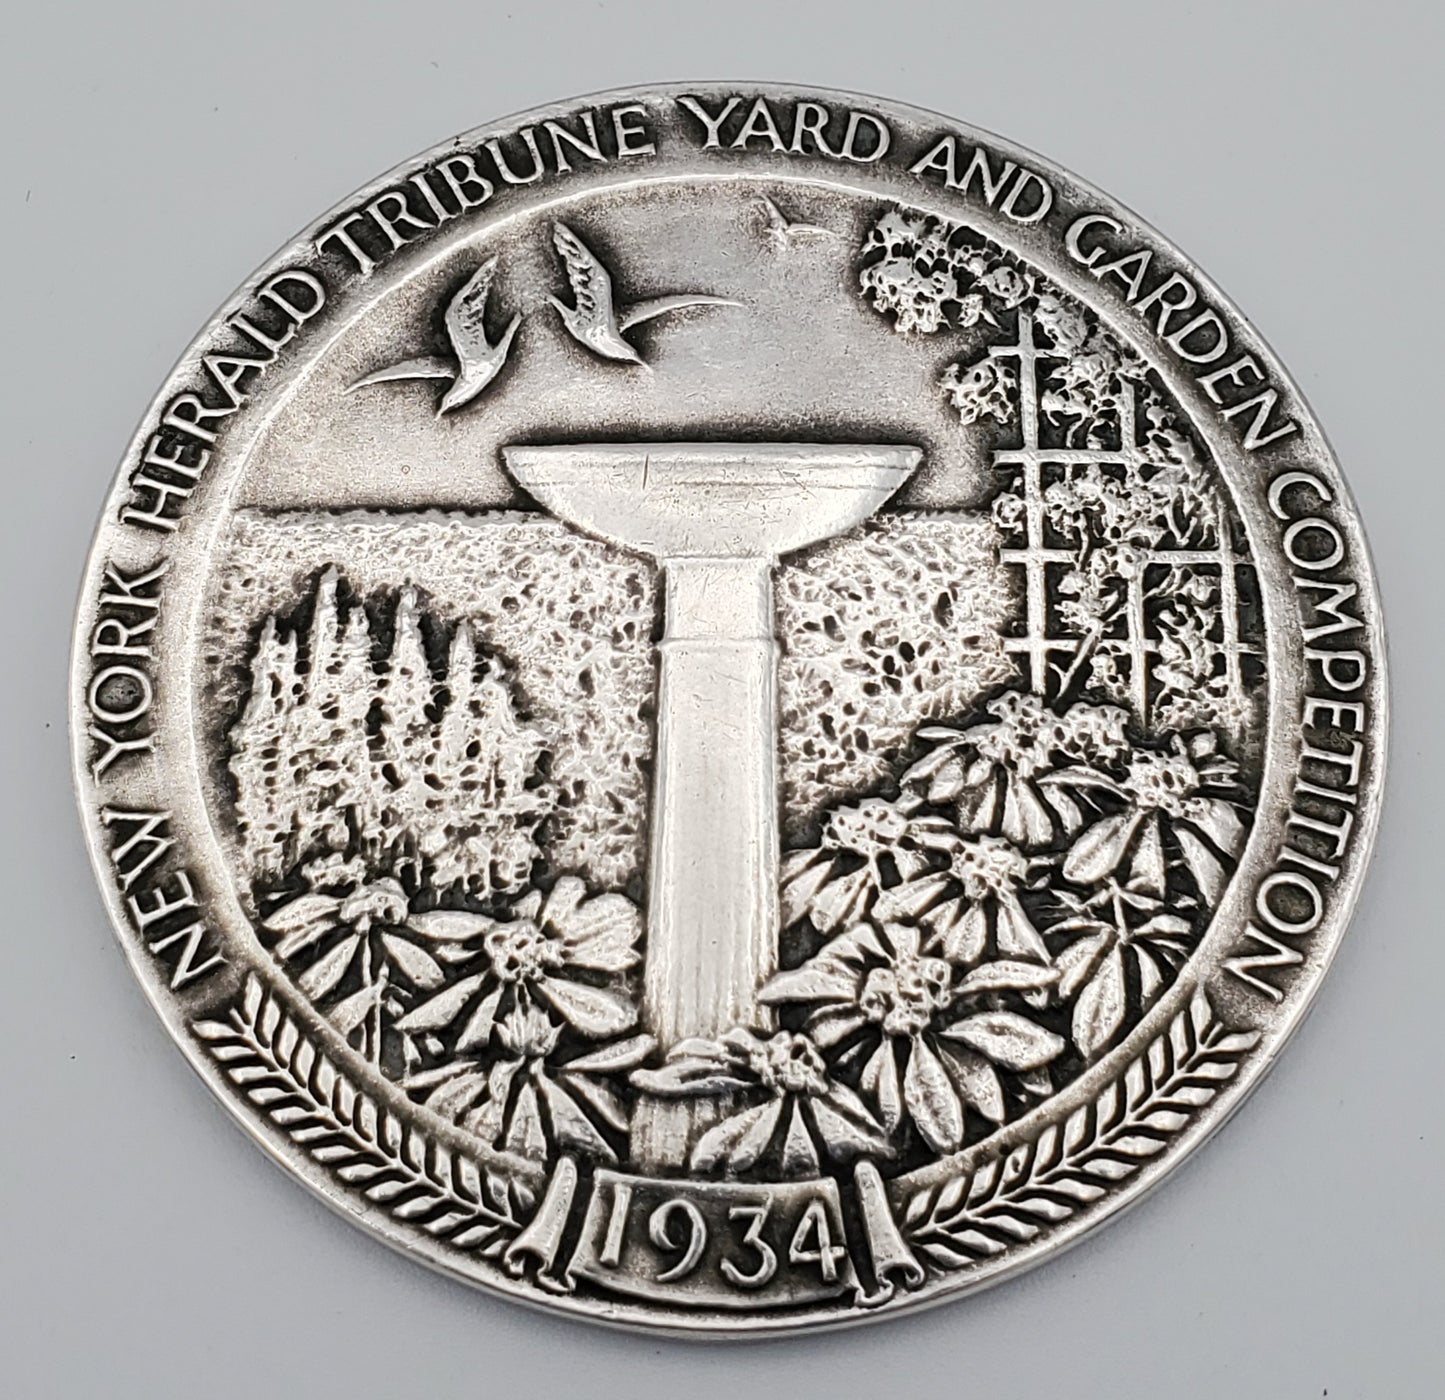 NEW YORK HERALD 1934 TRIBUNE YARD AND GARDEN COMPETITION STERLING MEDAL